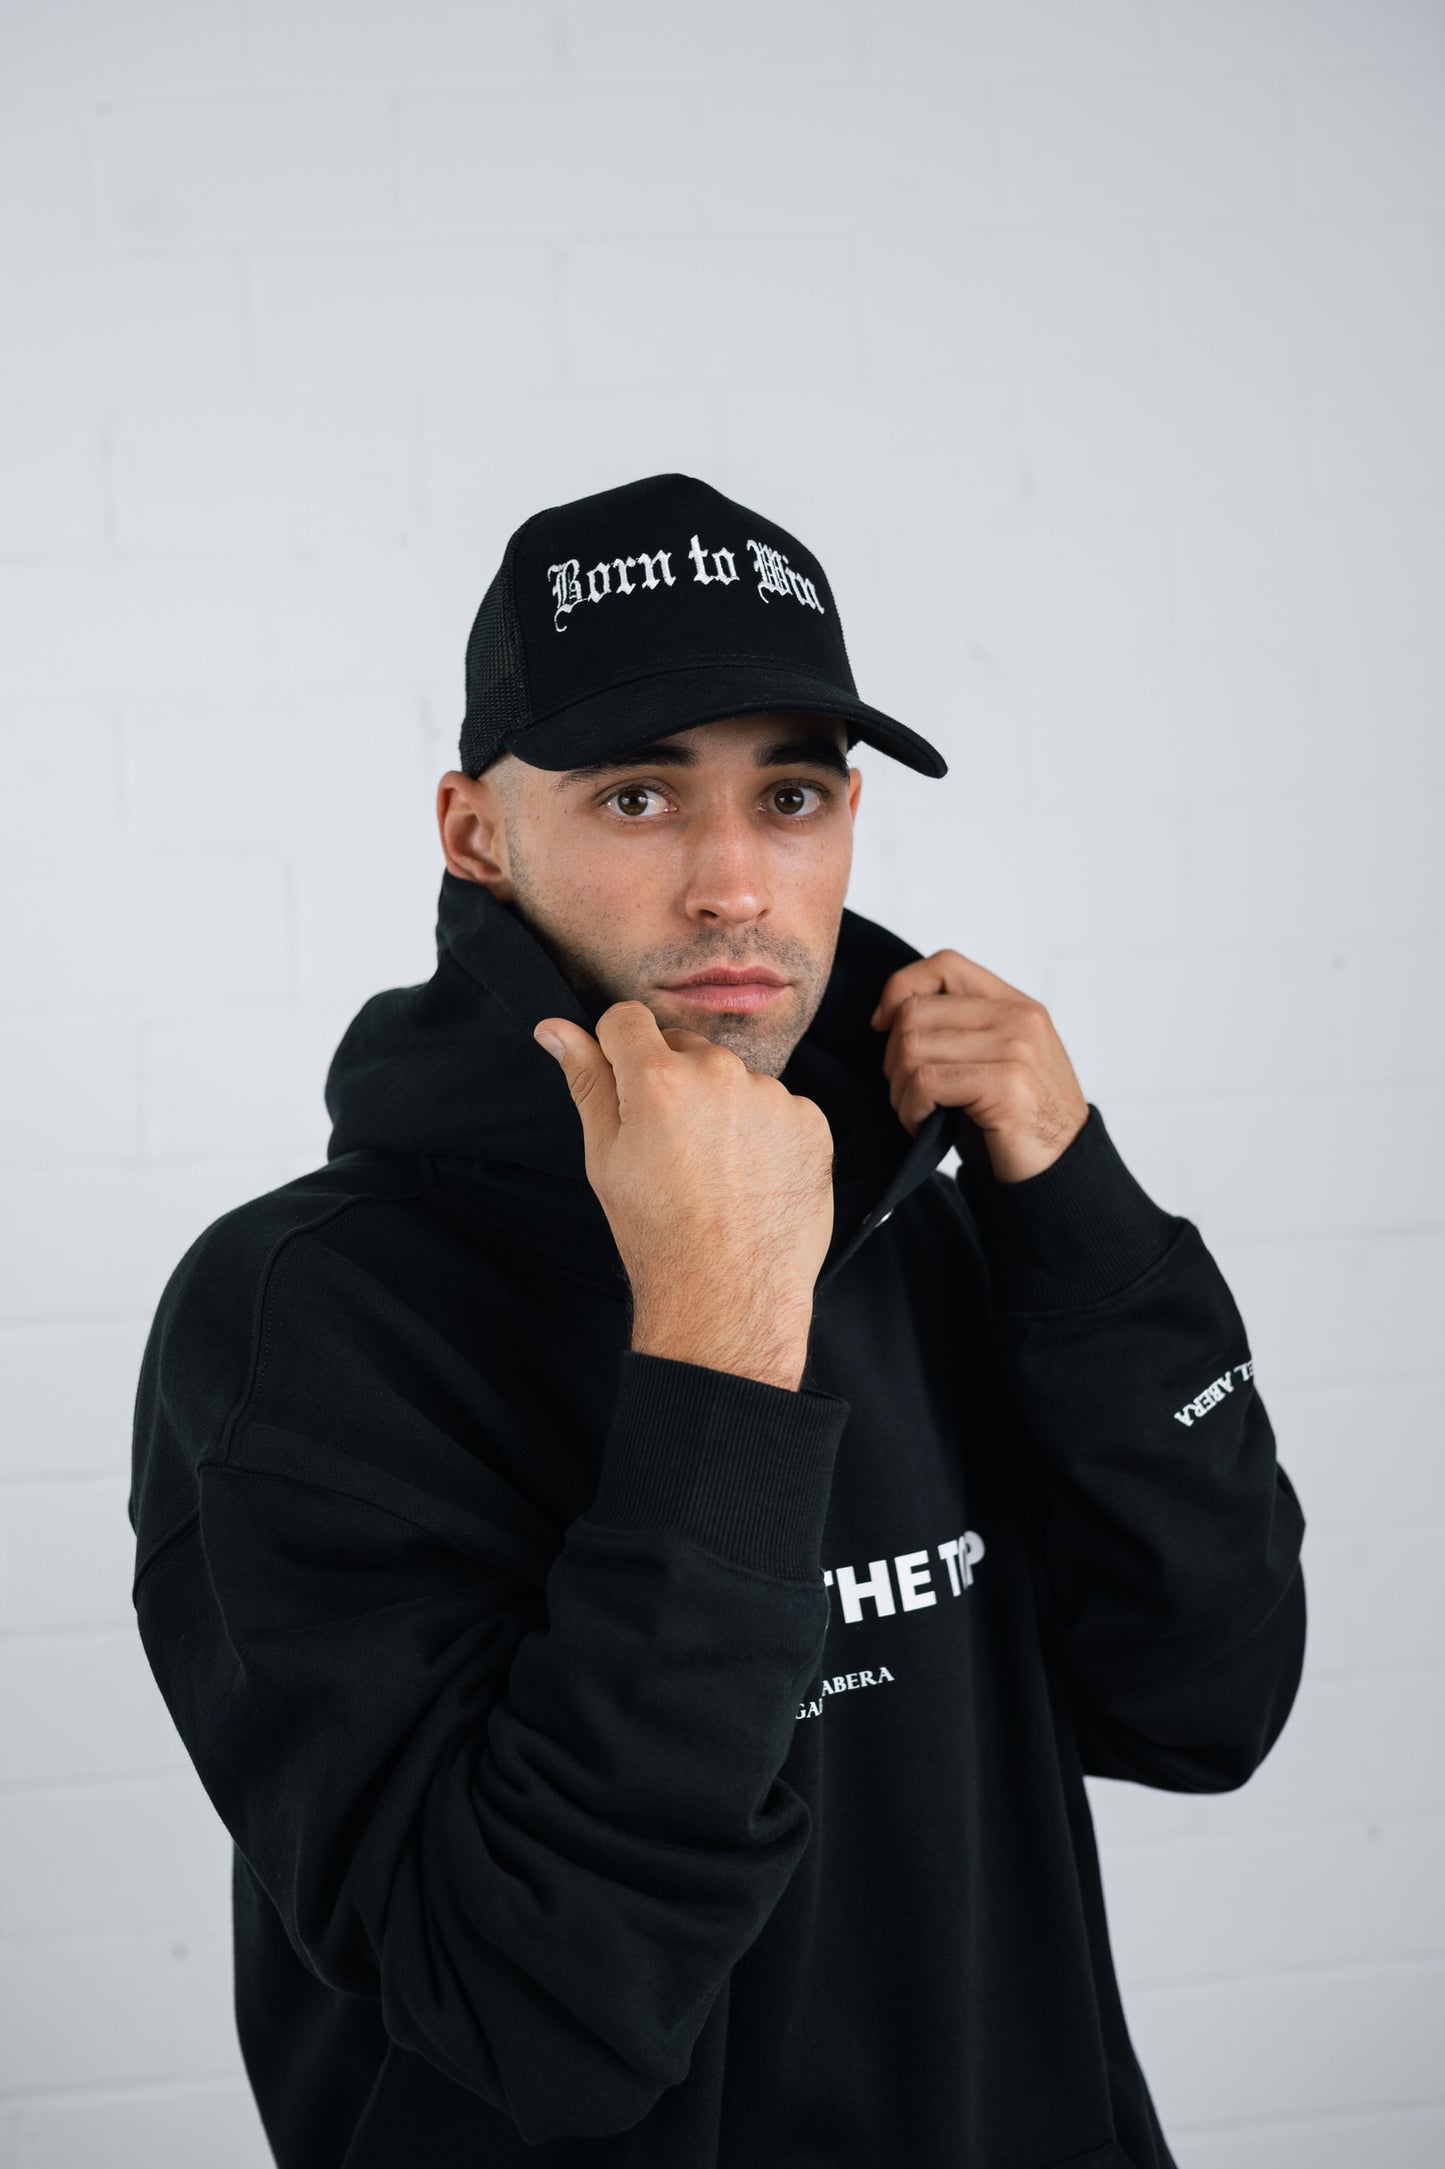 Male model wearing a Black trucker cap with born to win embroidery